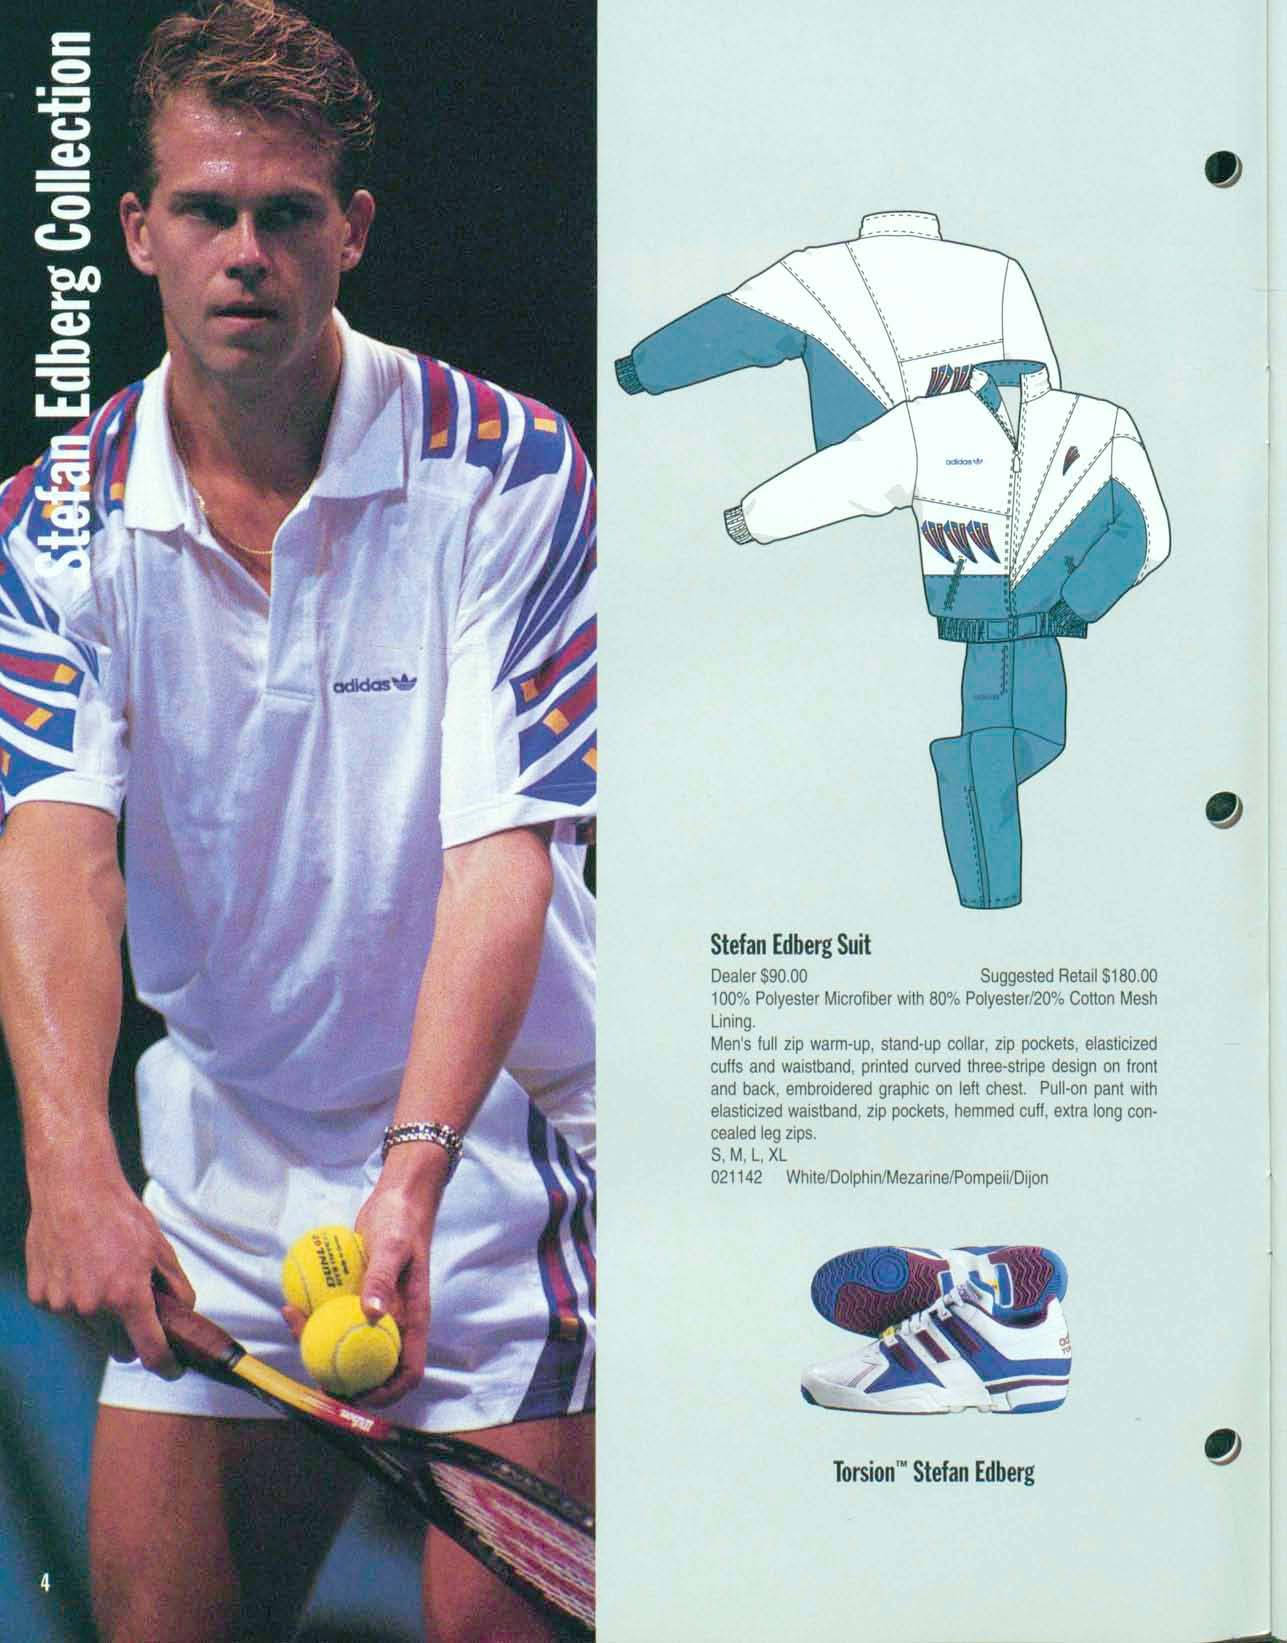 The legendary tennis player, Stefan Edberg, in his tennis outfit with shoes on. Wallpaper